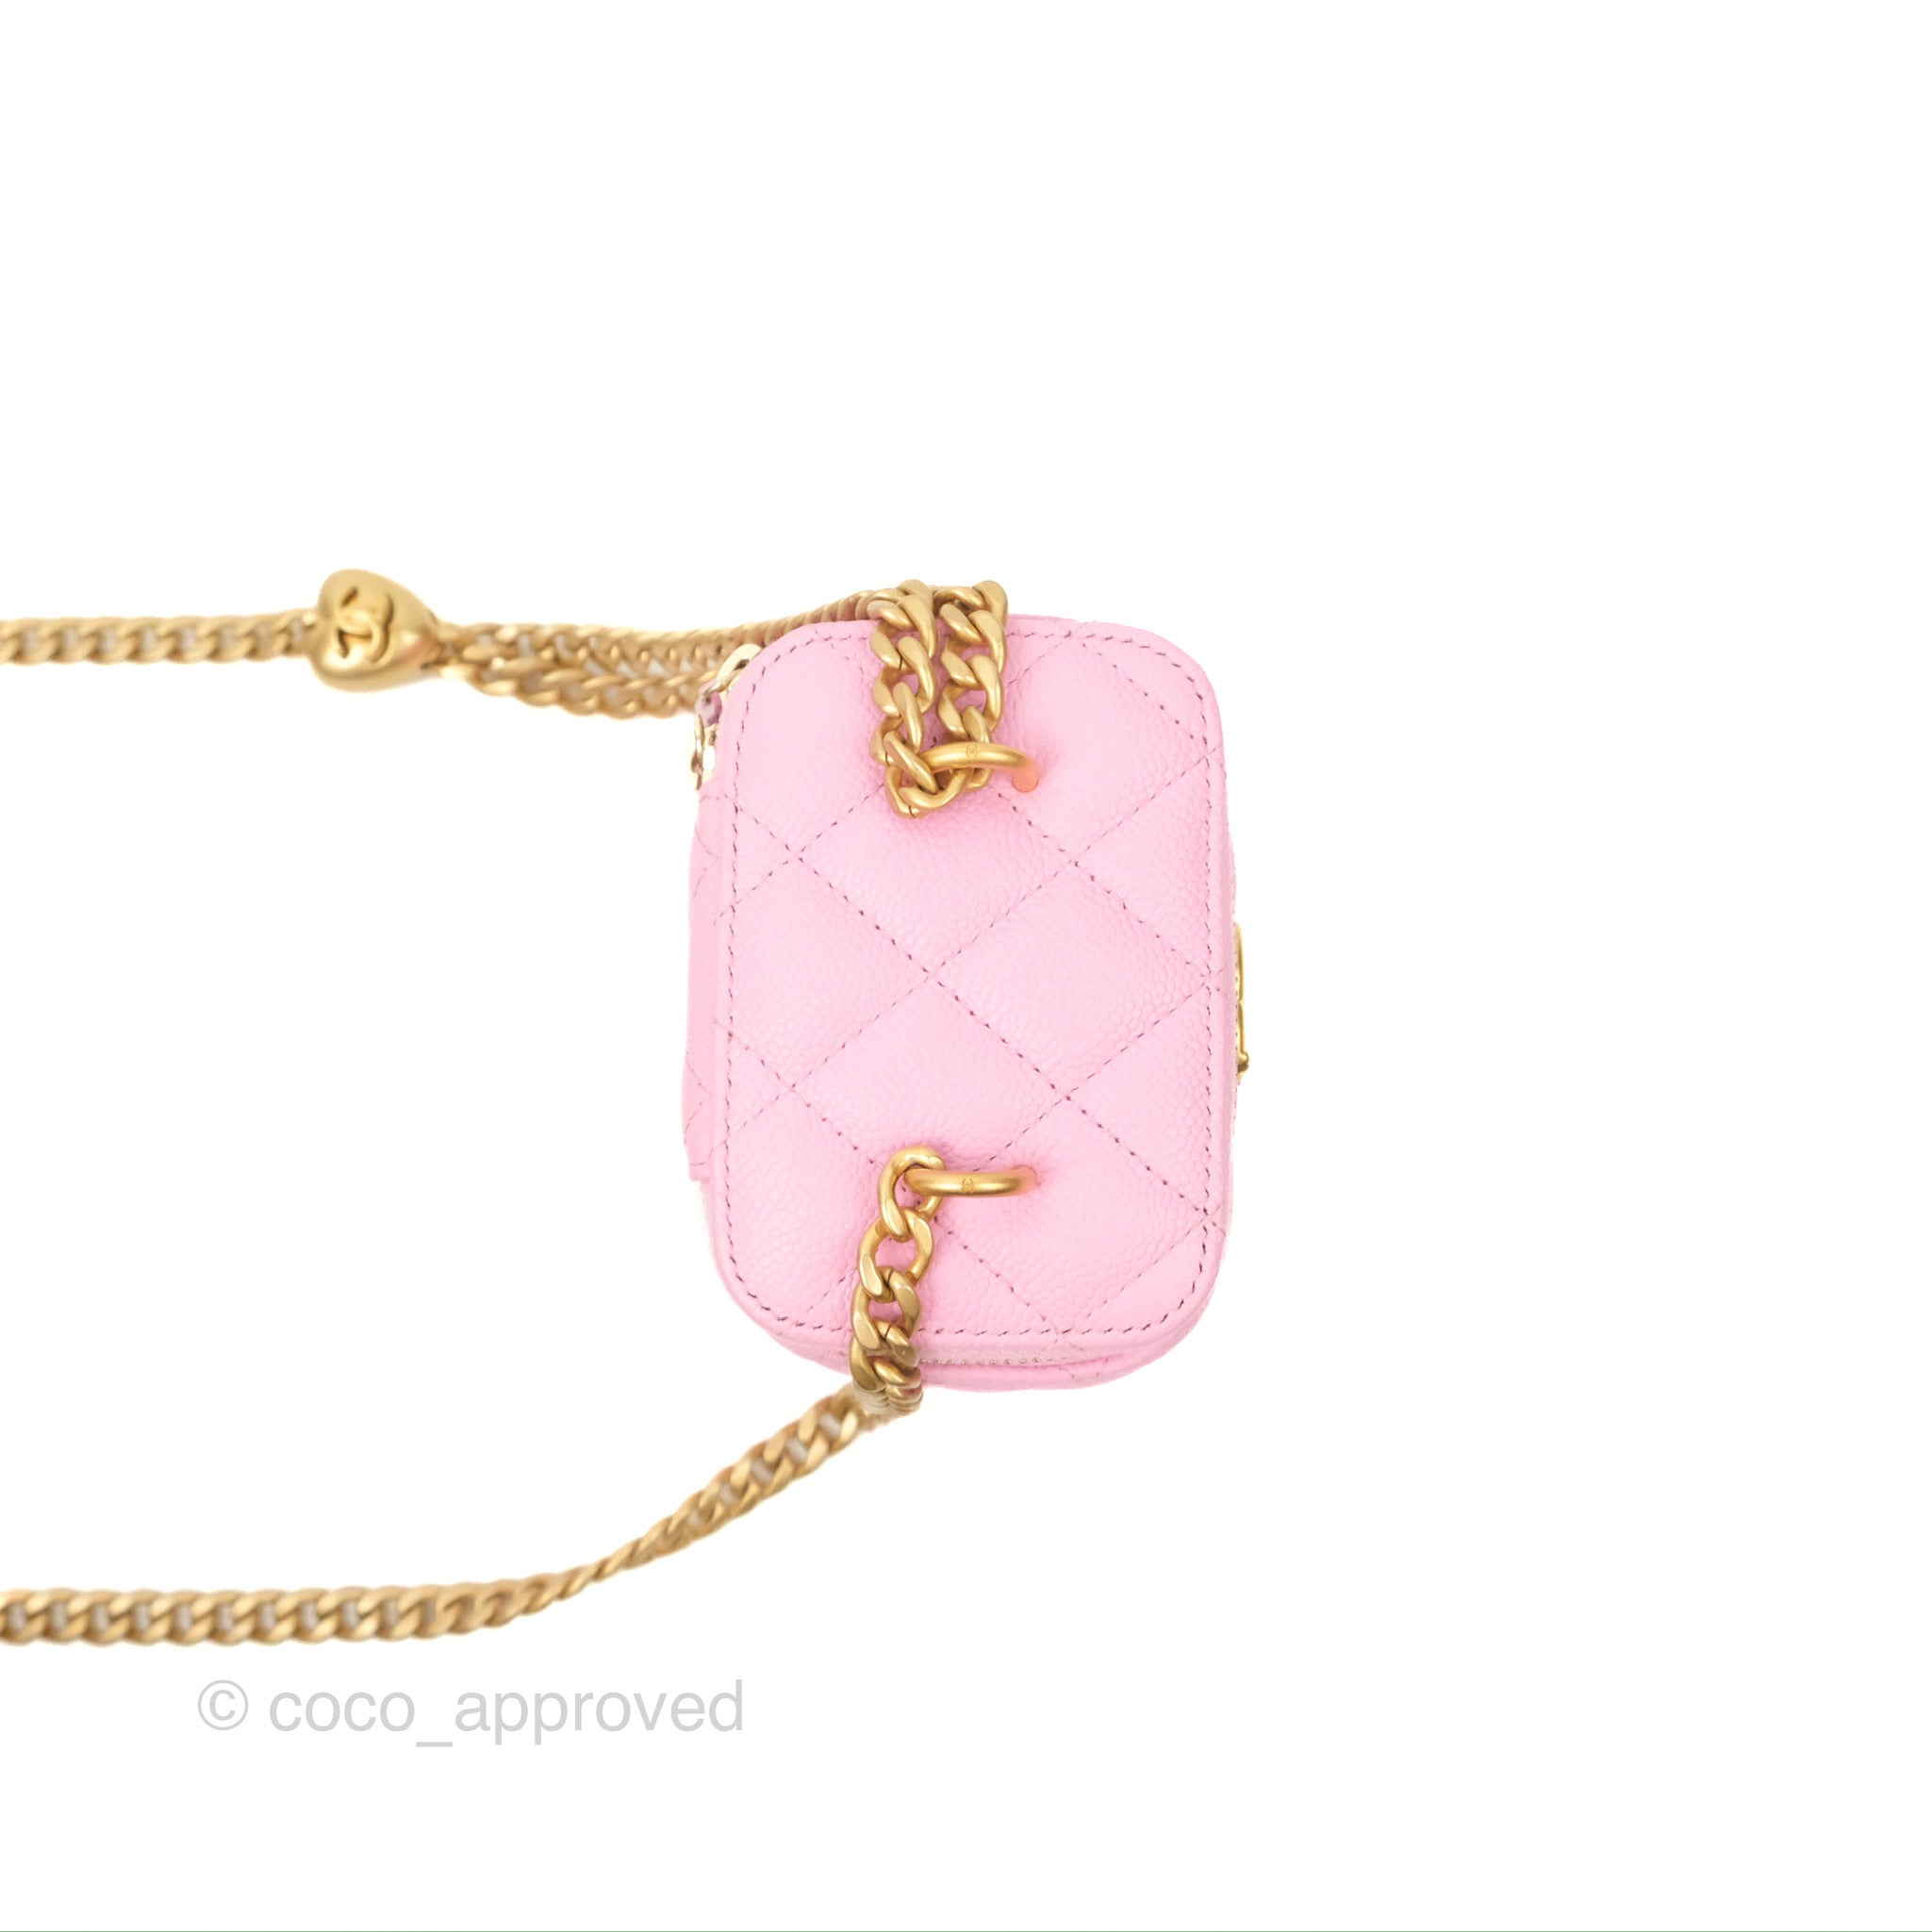 Chanel Small Classic Vanity Case Pink Caviar Light Gold Hardware